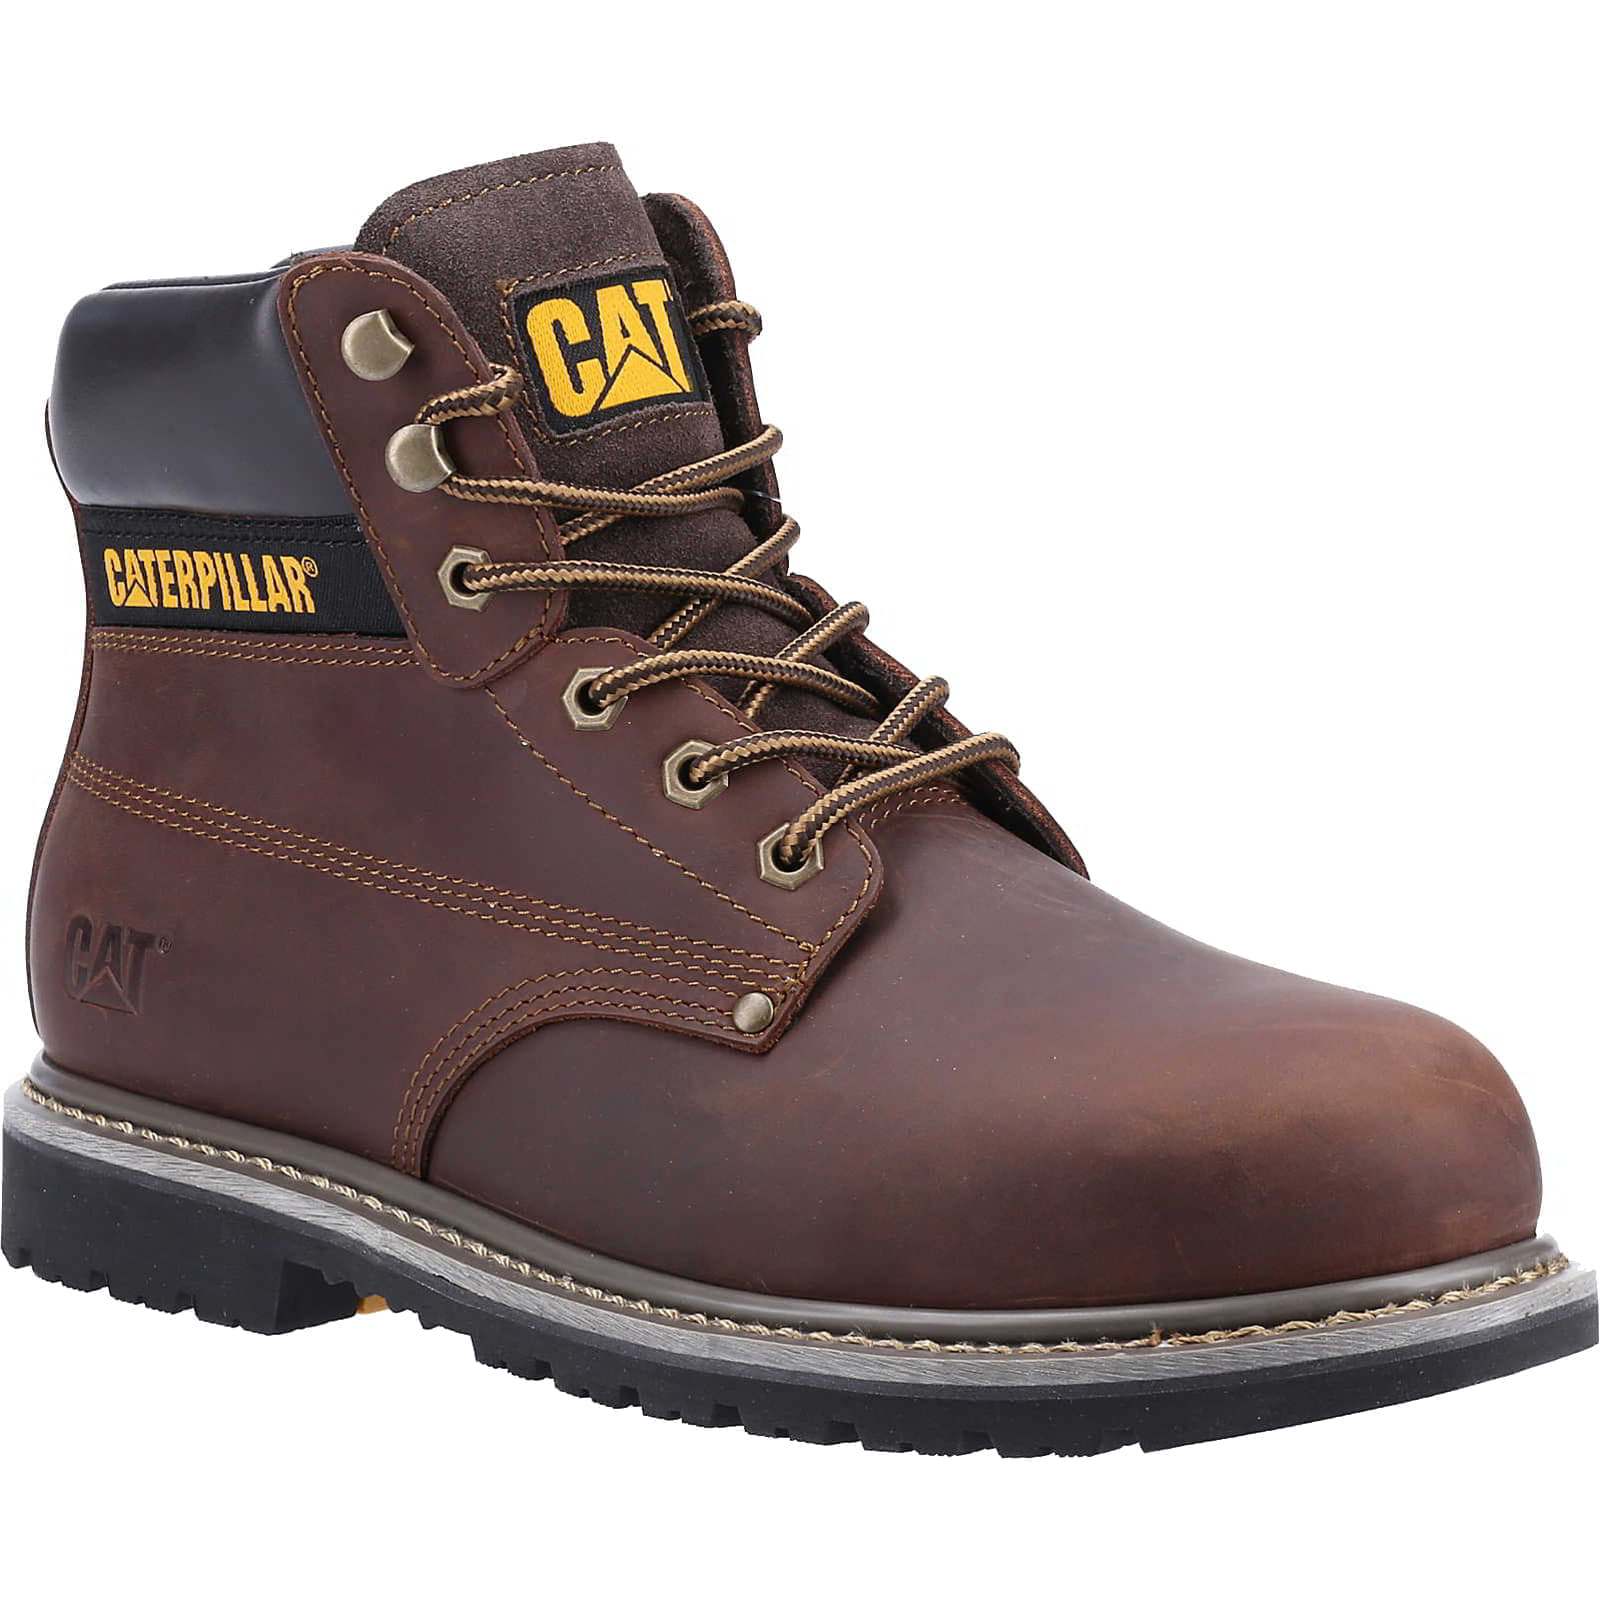 Caterpillar Mens Powerplant Cat Steel Toe Cap Safety Ankle Boots - UK 10